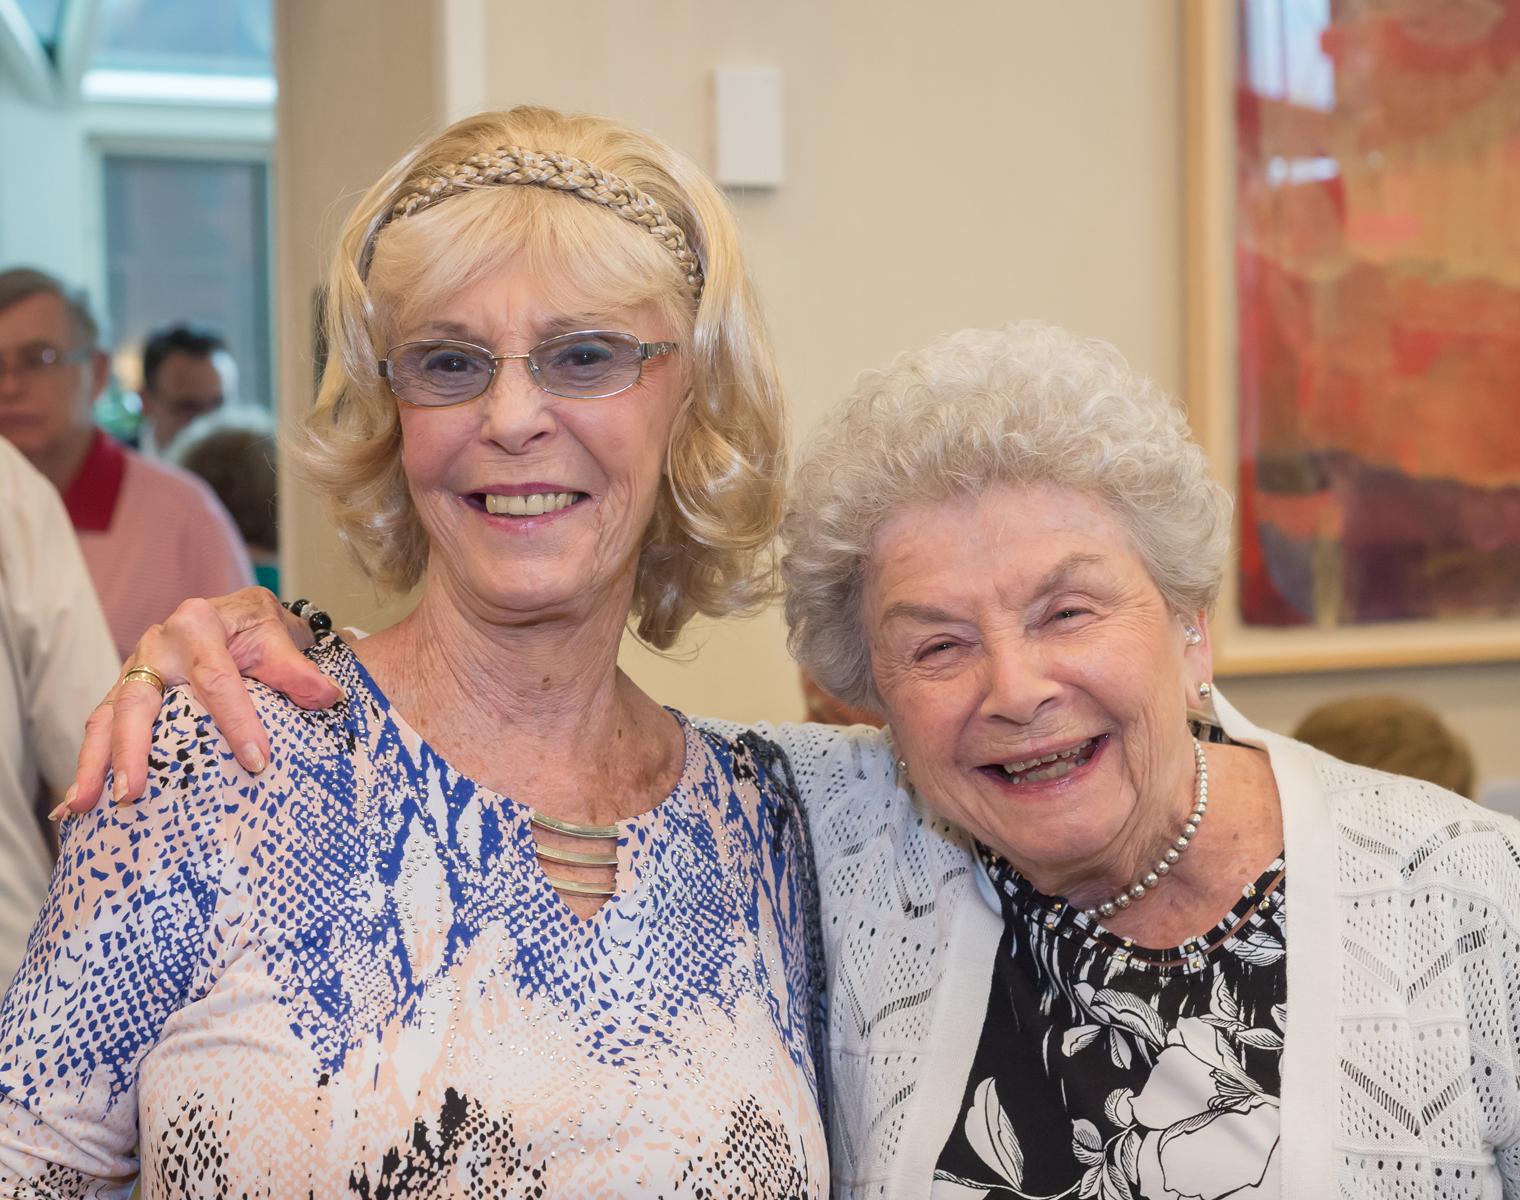 Two older women with big smiles stand close to each other looking at the camera. One woman has her arm around the other.